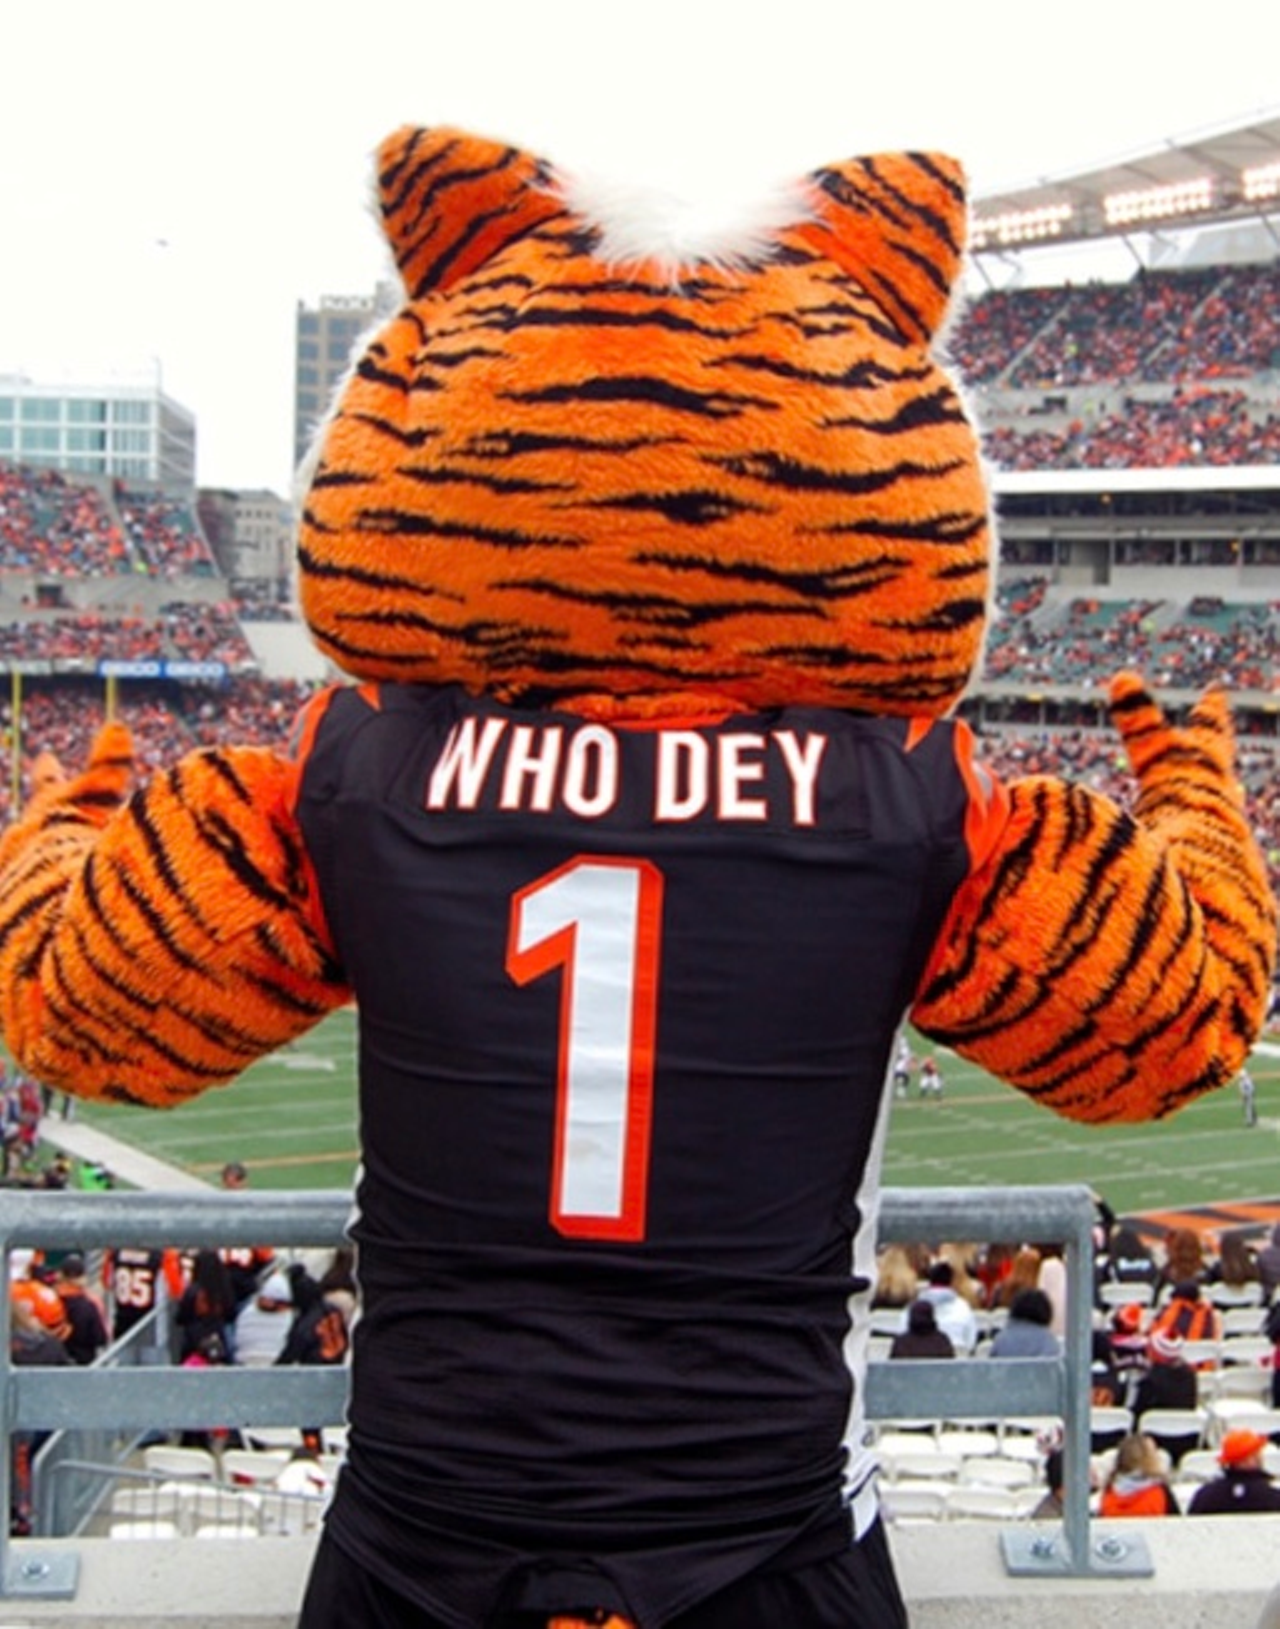 You will memorize the entire Bengals “Who-Dey” chant.